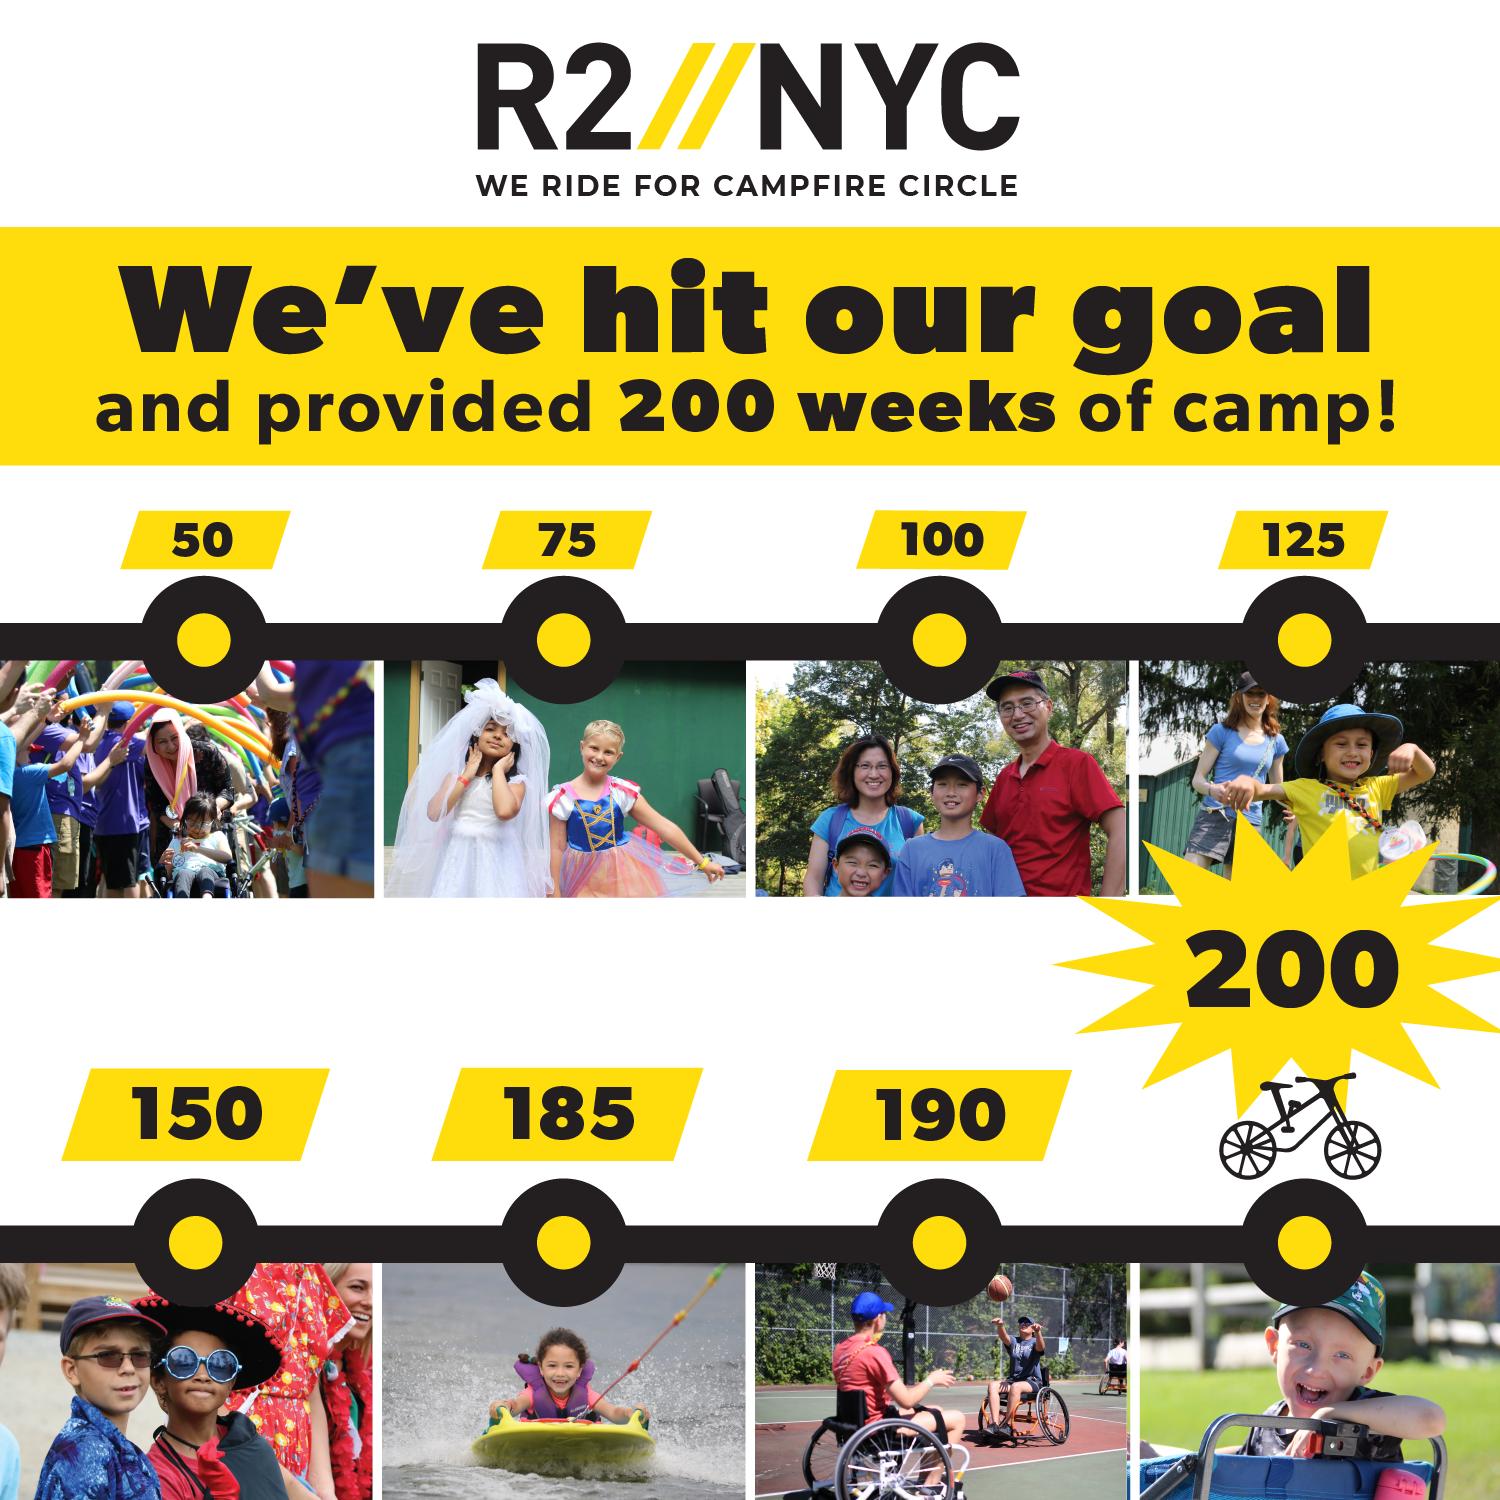 R2NYC We ride for Campfire Circle. We have raised enough funds to provide 200 weeks of camp